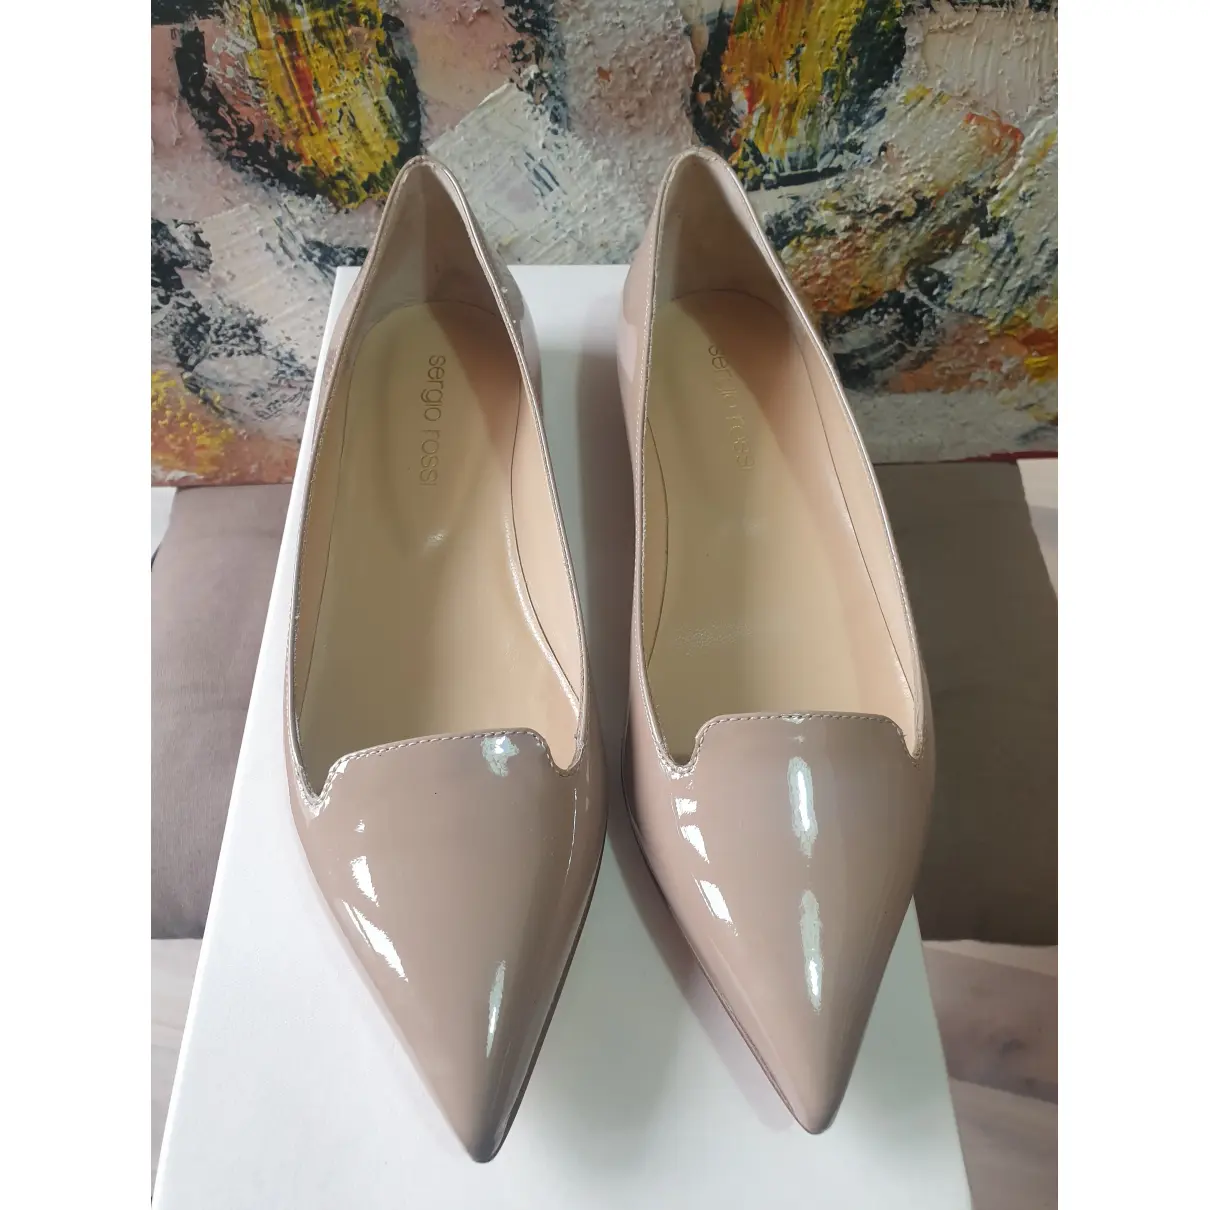 Buy Sergio Rossi Patent leather flats online